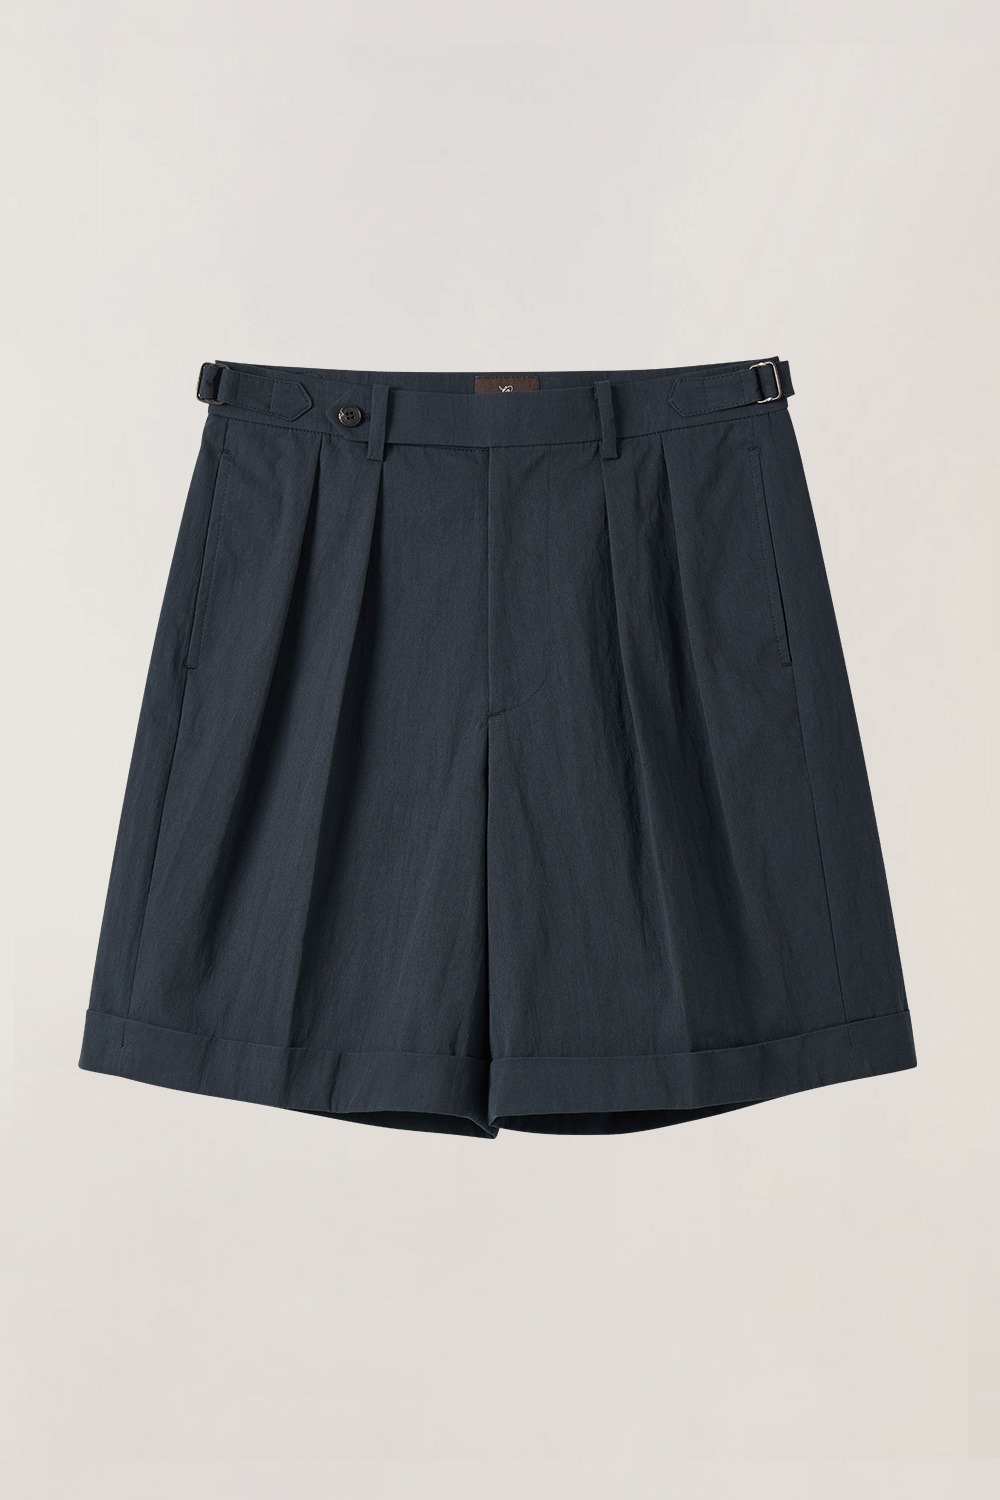 Cotton Reverse Two-tuck Shorts_Blue Navy